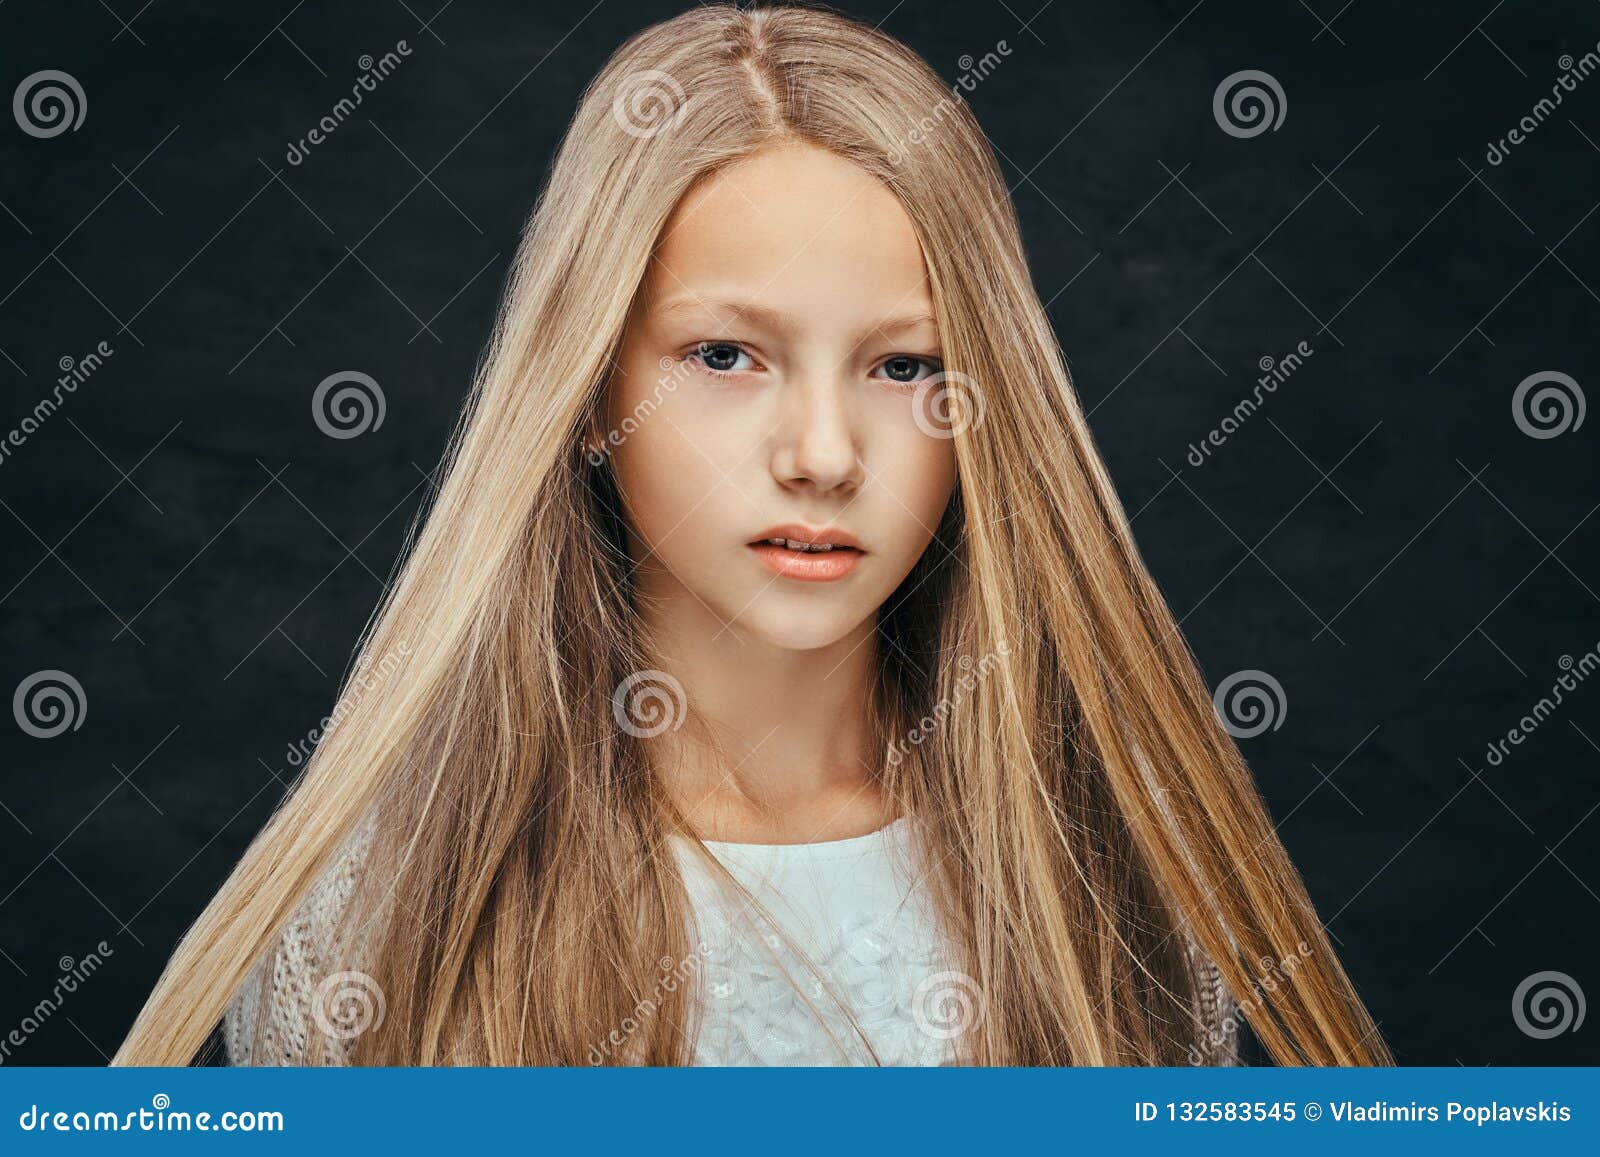 Close-up of a young girl with blonde hair - wide 10